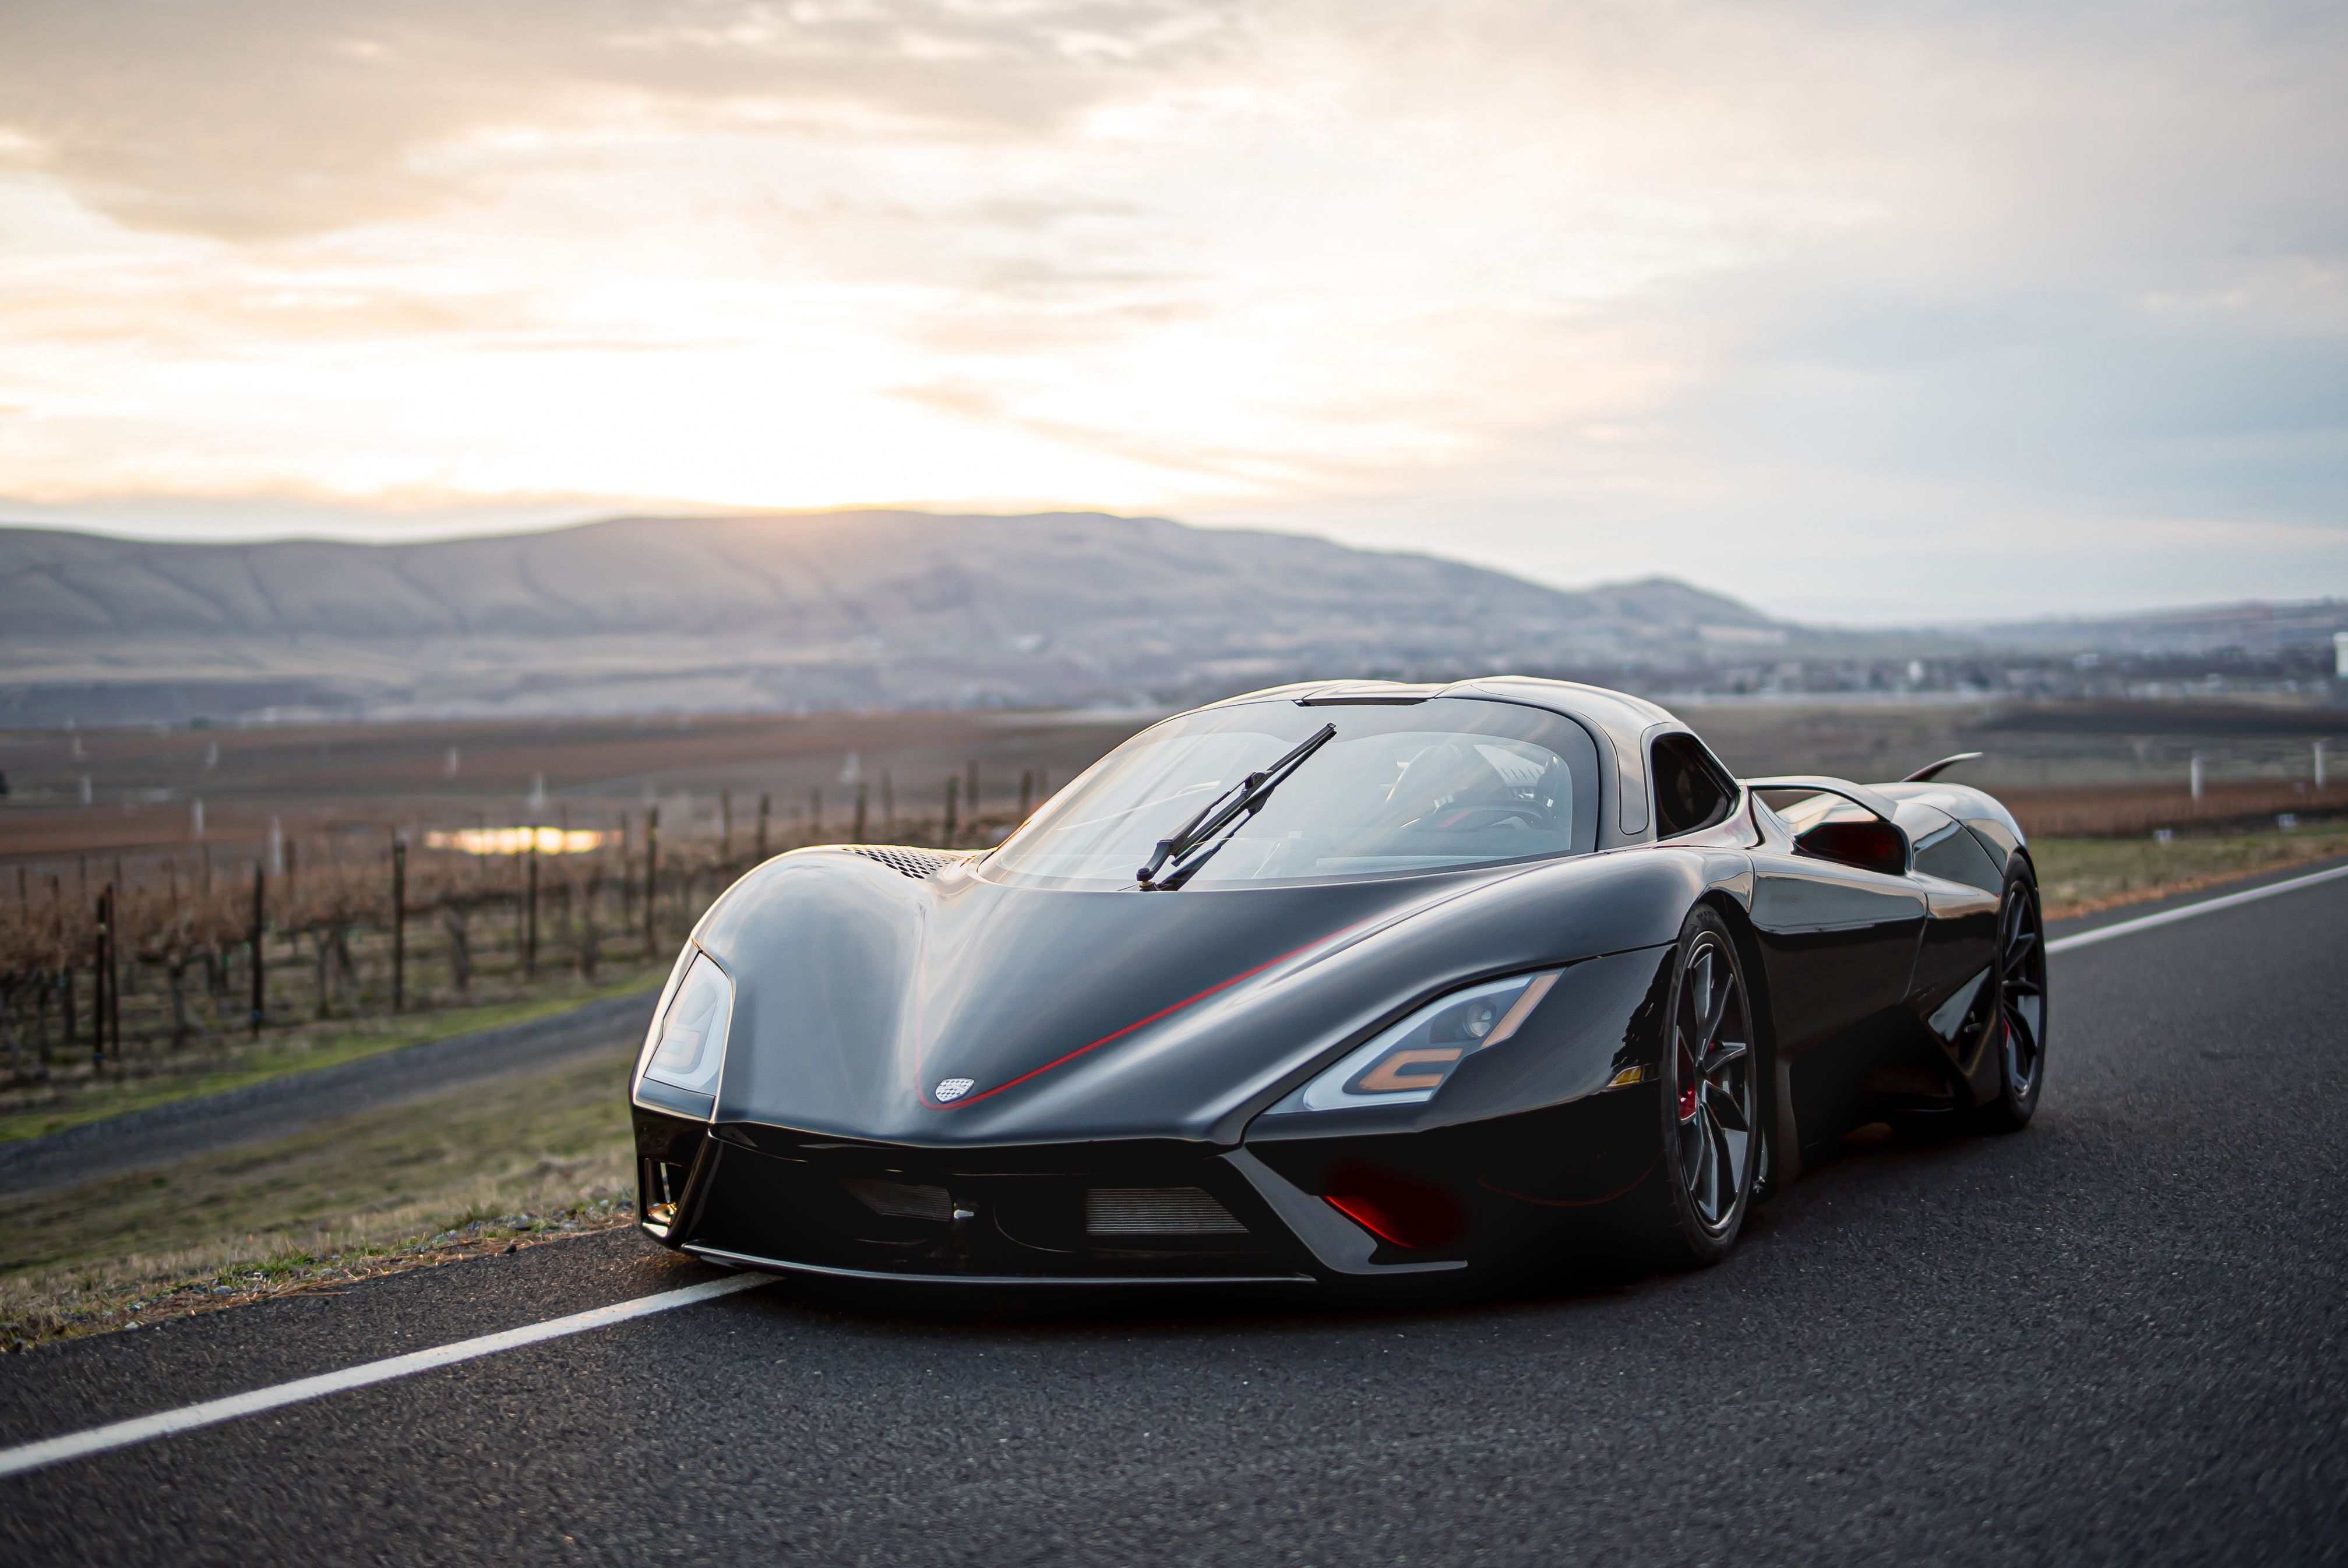 2021 Video: SSC Tuatara Hits 331 MPH; Is Now The World’s Fastest Production Car